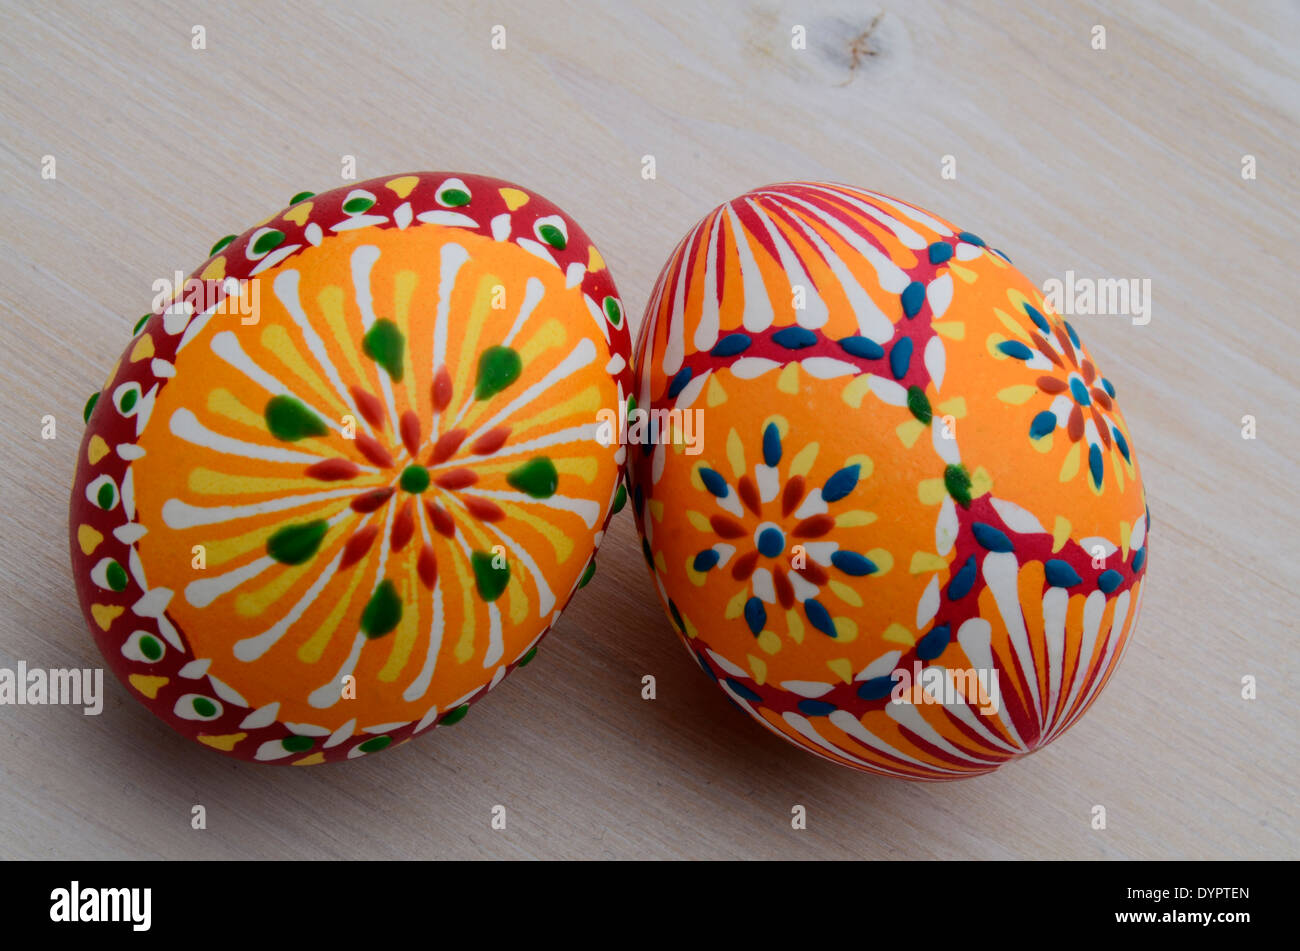 handpainted eastereggs on a wooden table Stock Photo